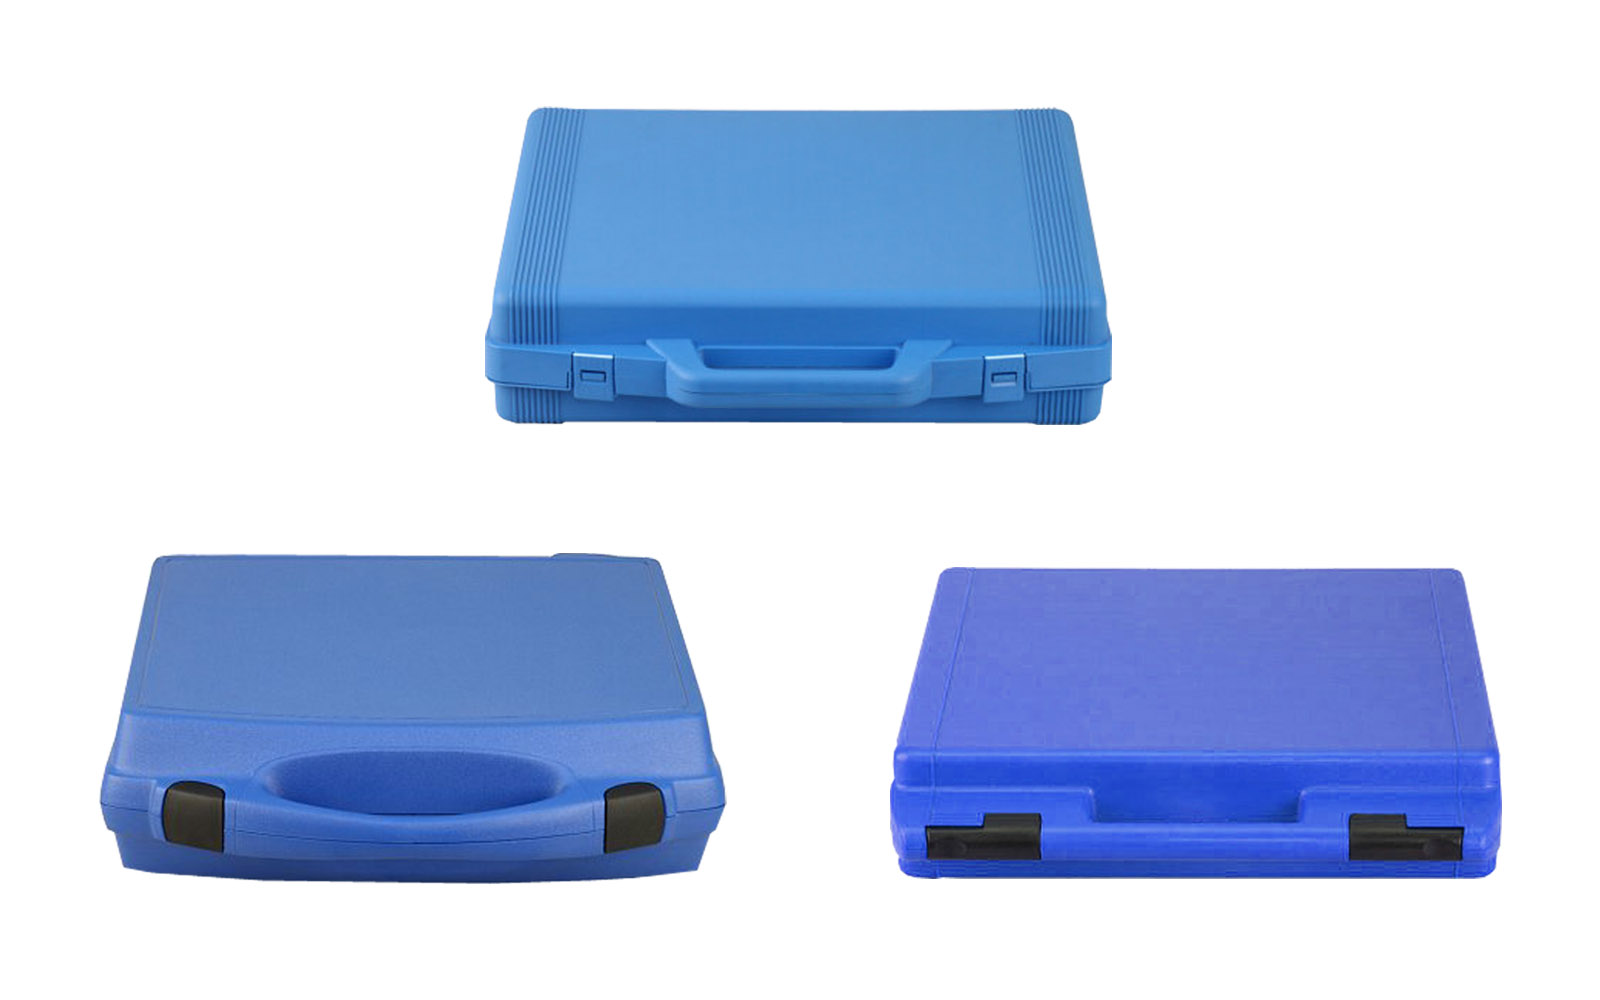 Injection molded cases